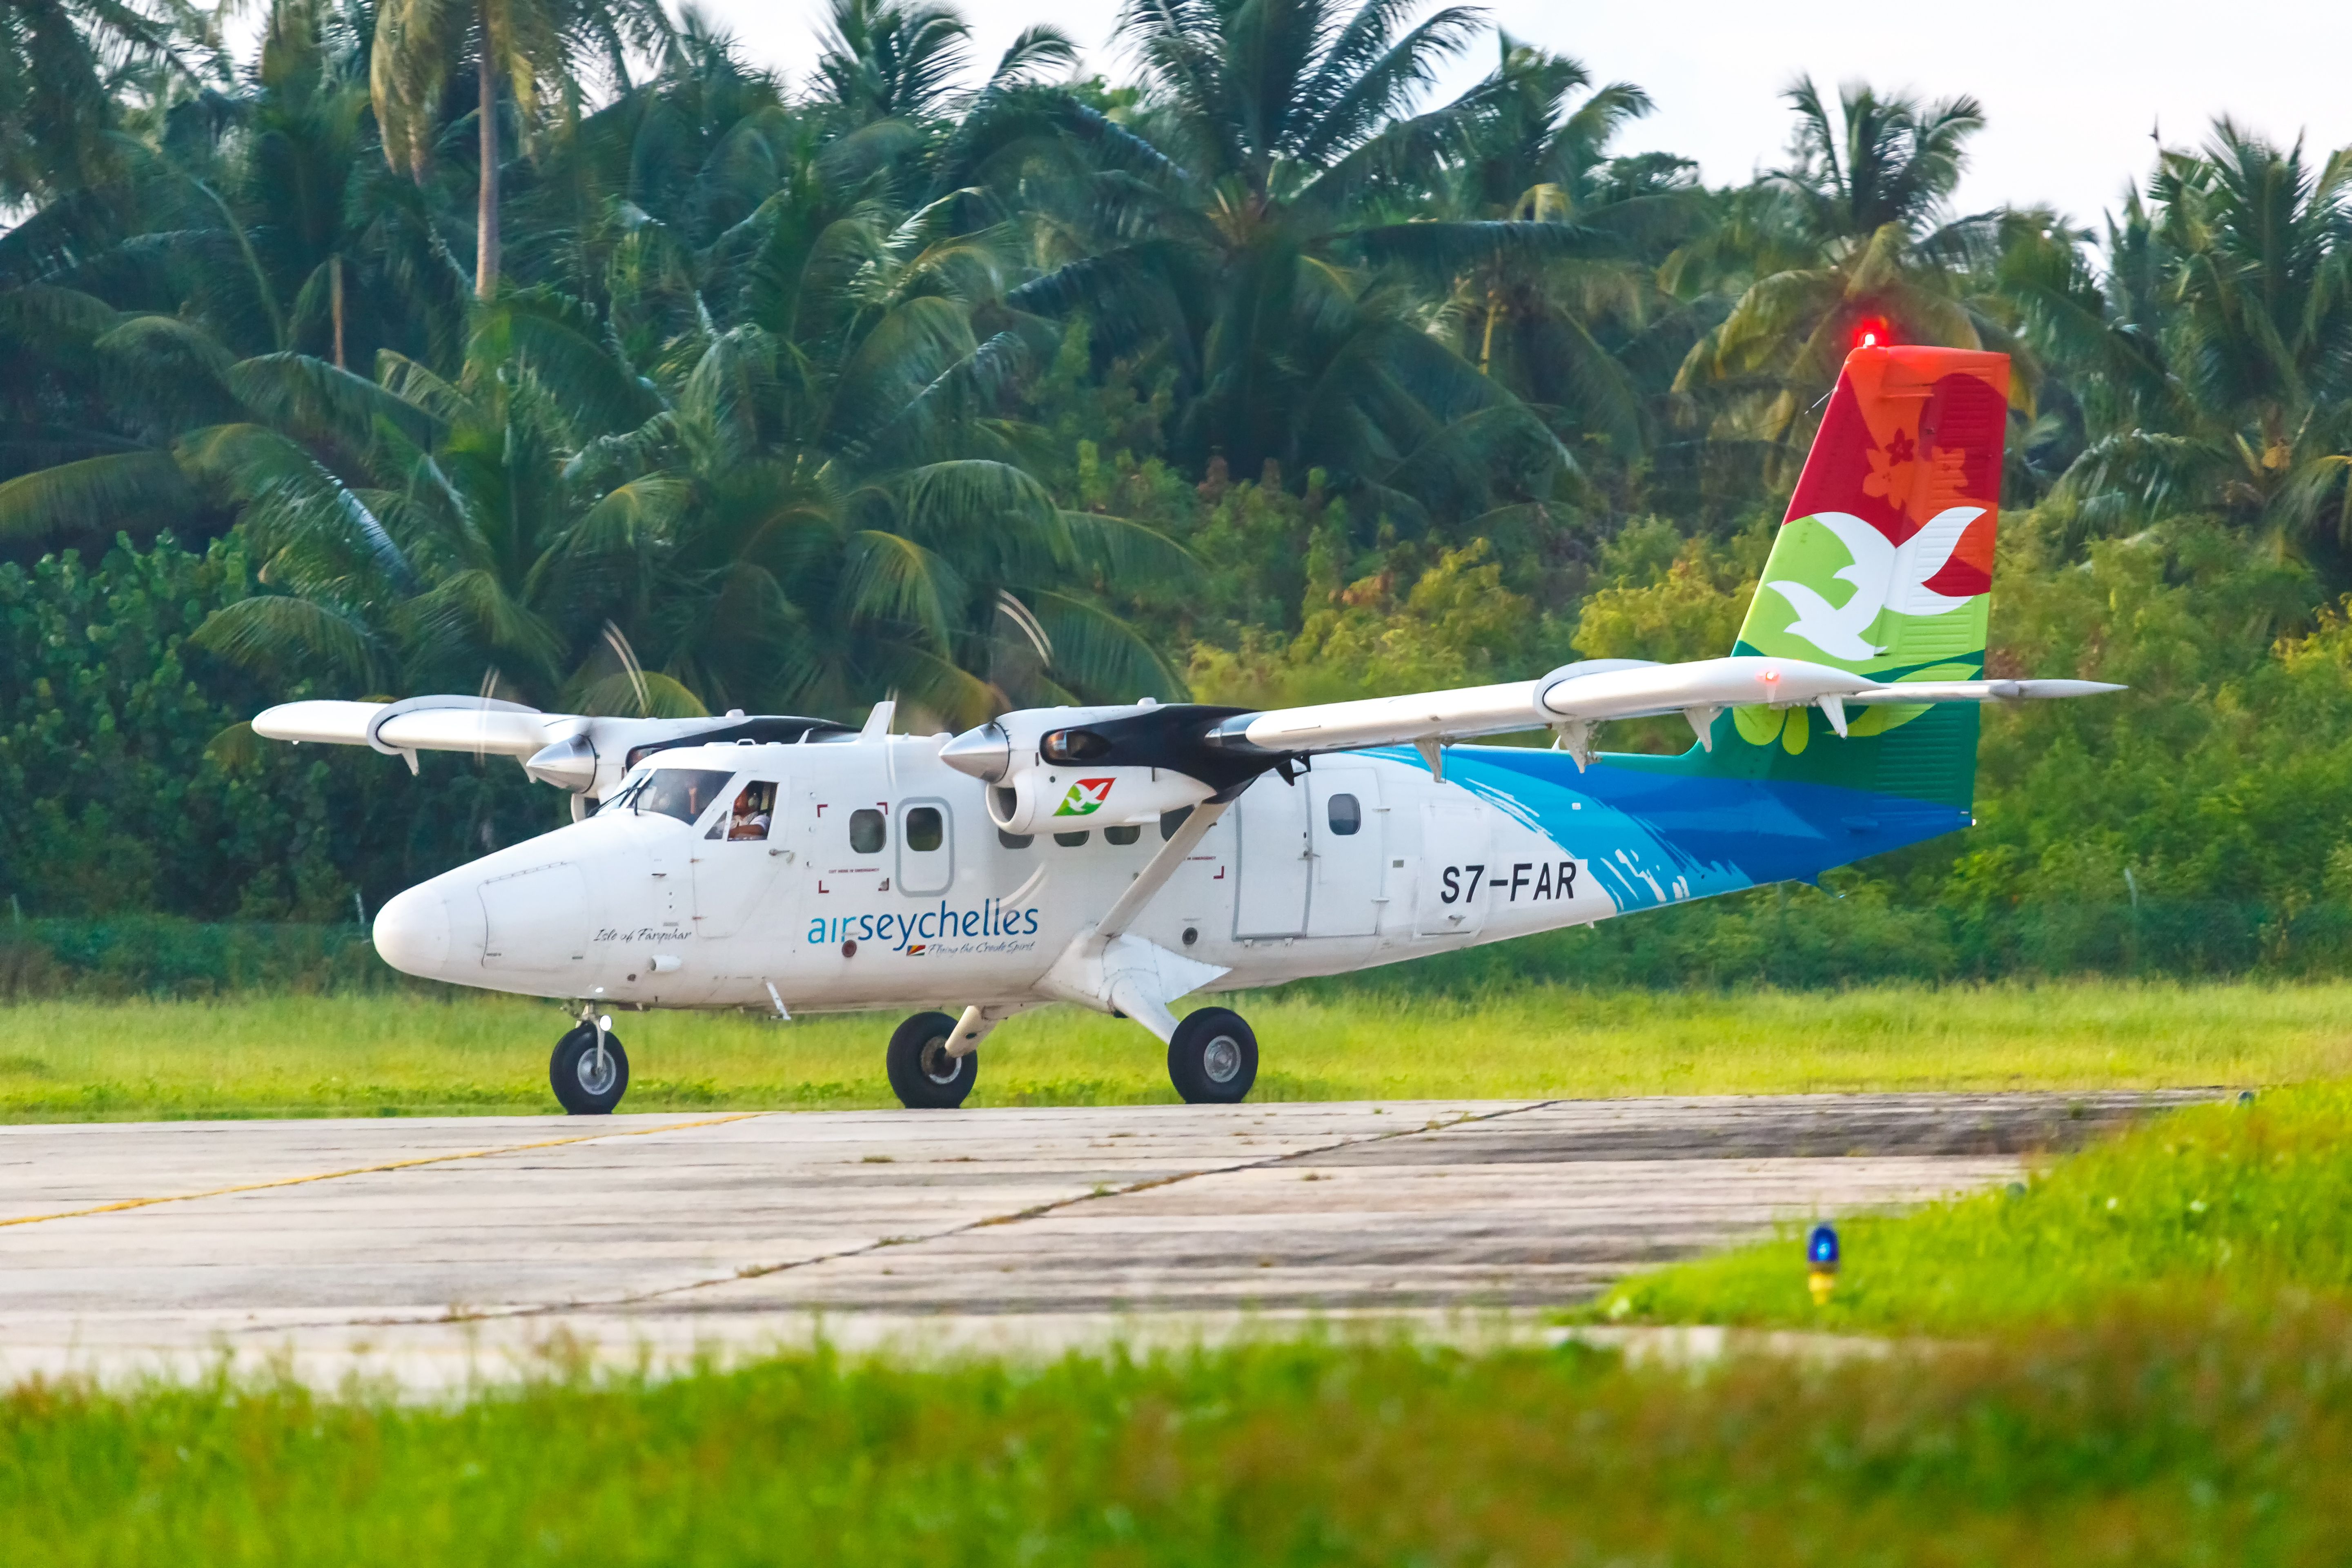 An Air Seychelles DHC-6-400 Twin Otter on an airport apron.